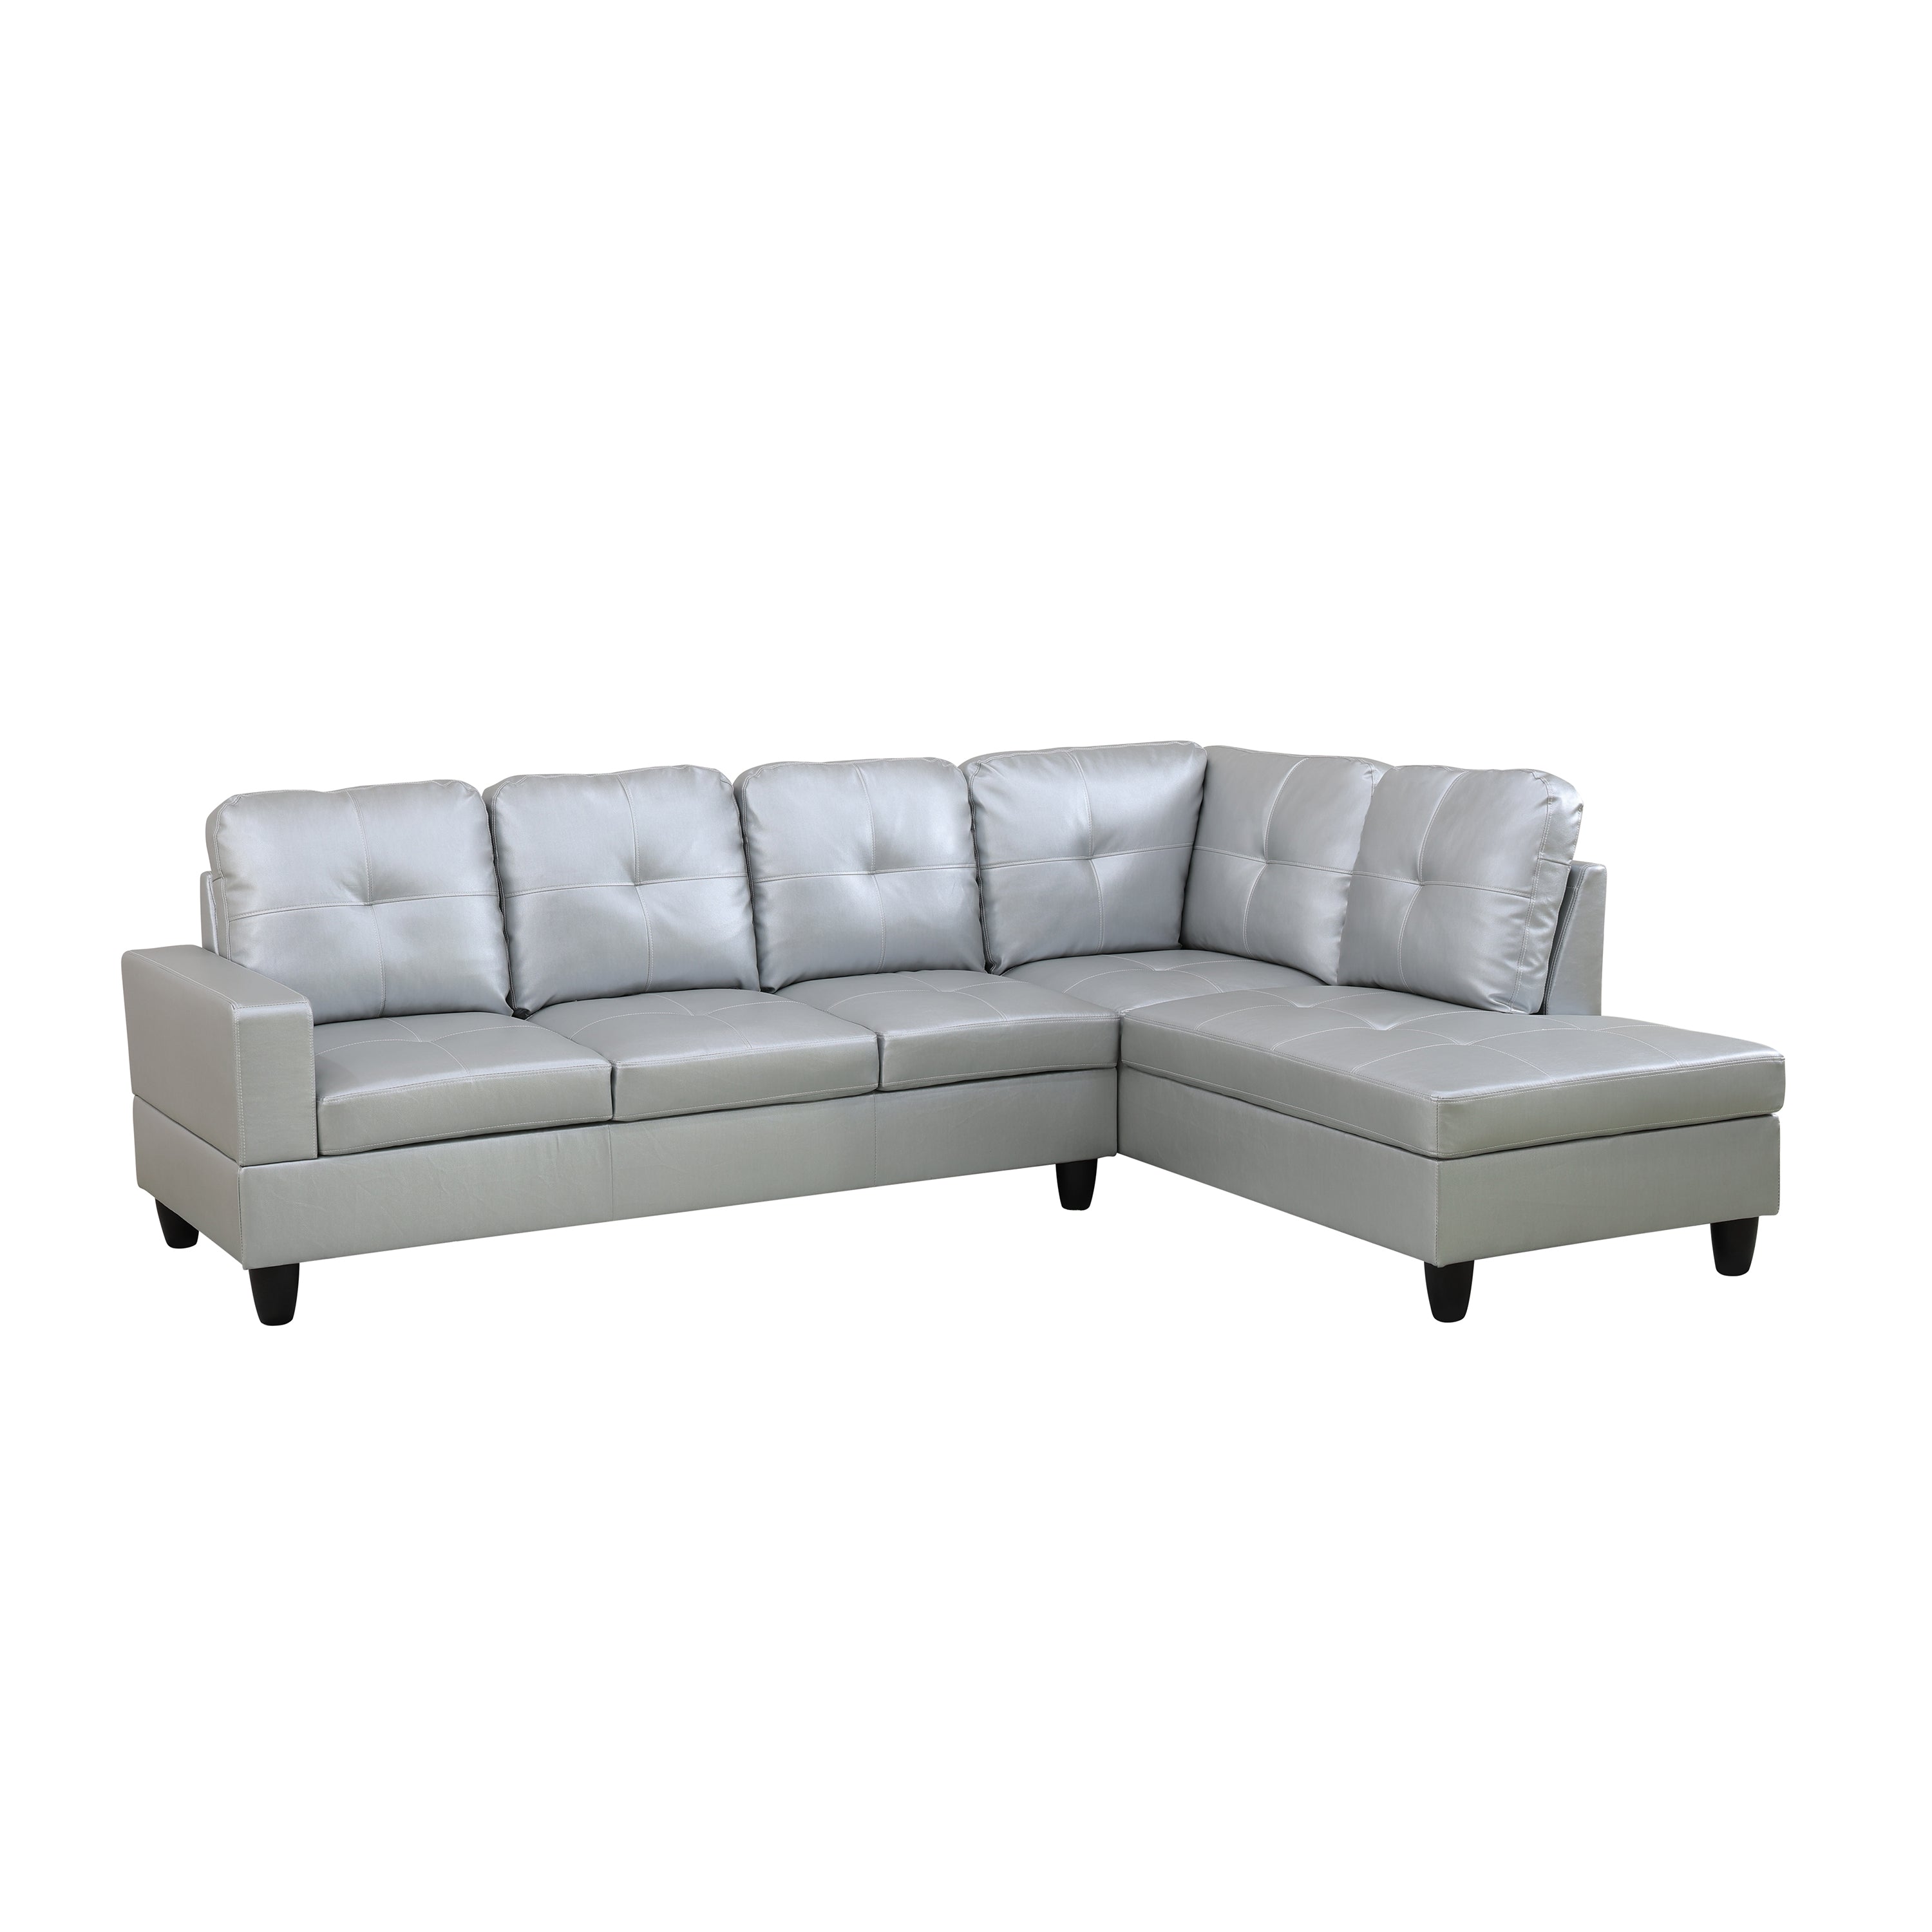 Ainehome L-Shaped Sofa Set in Silver and White Leather